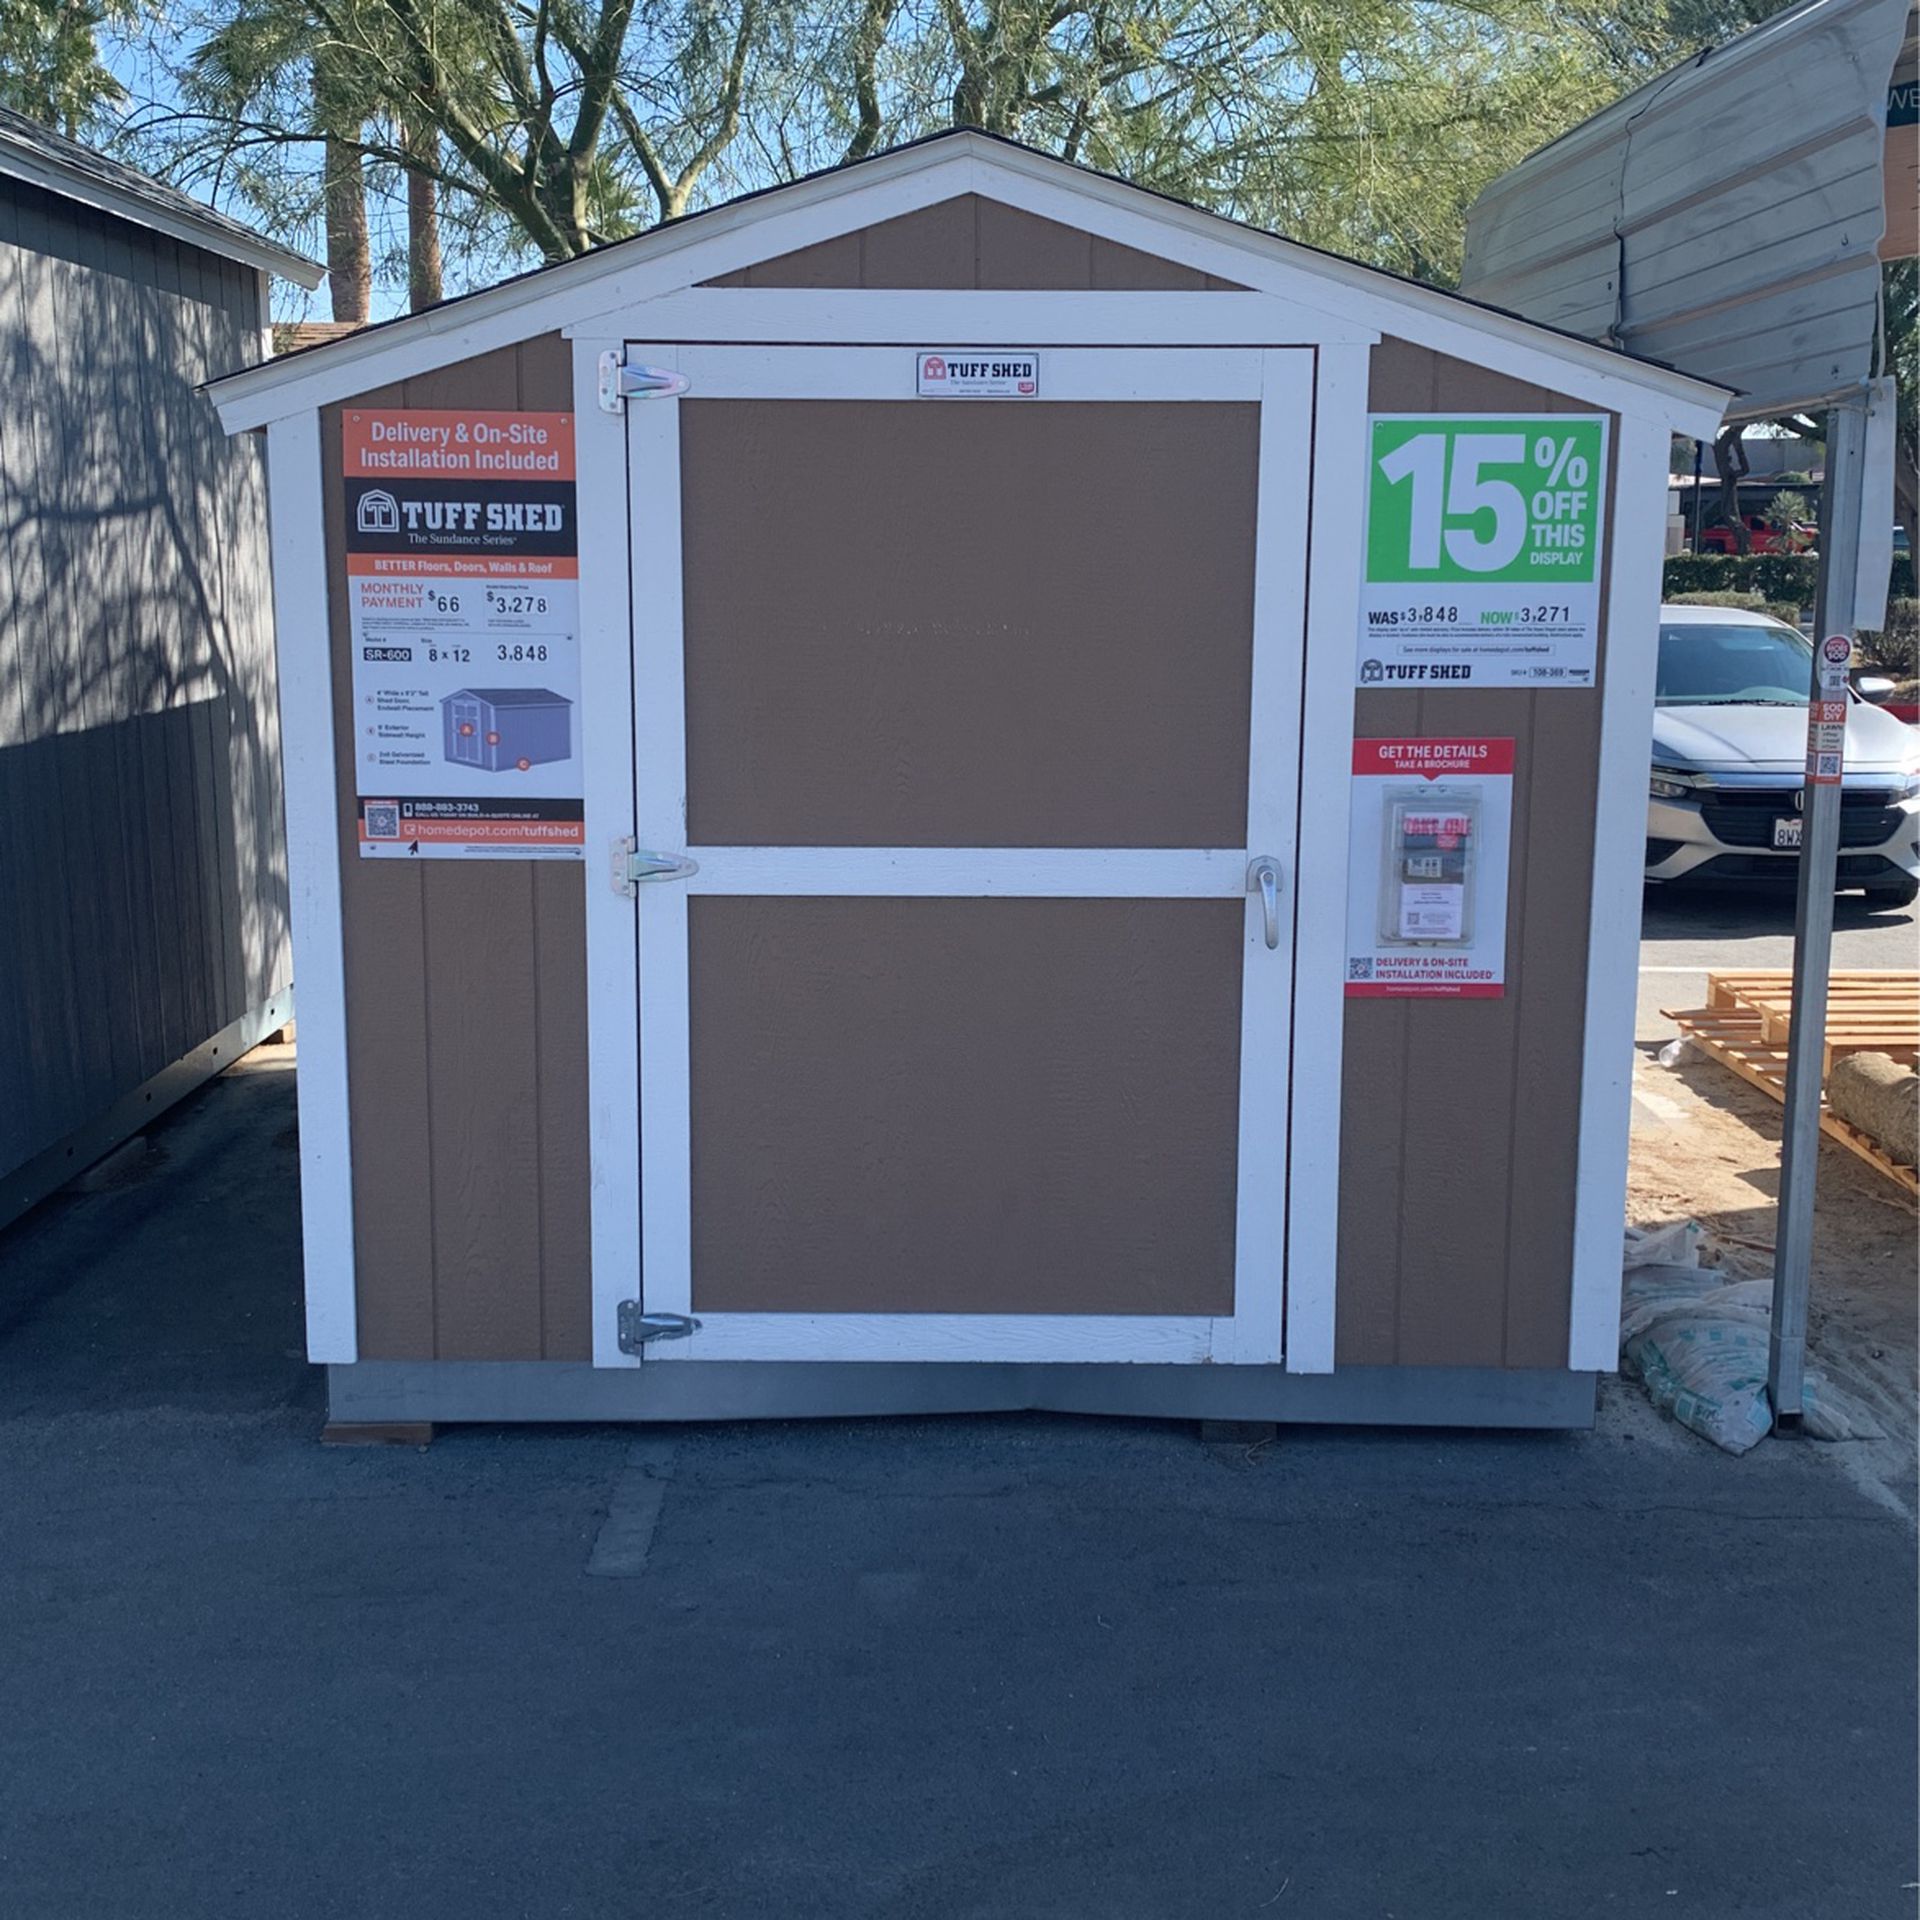 Tuff Shed Sundance SR-600 8x12 Was $3,848 Now $3,271 15% Off Financing Available!